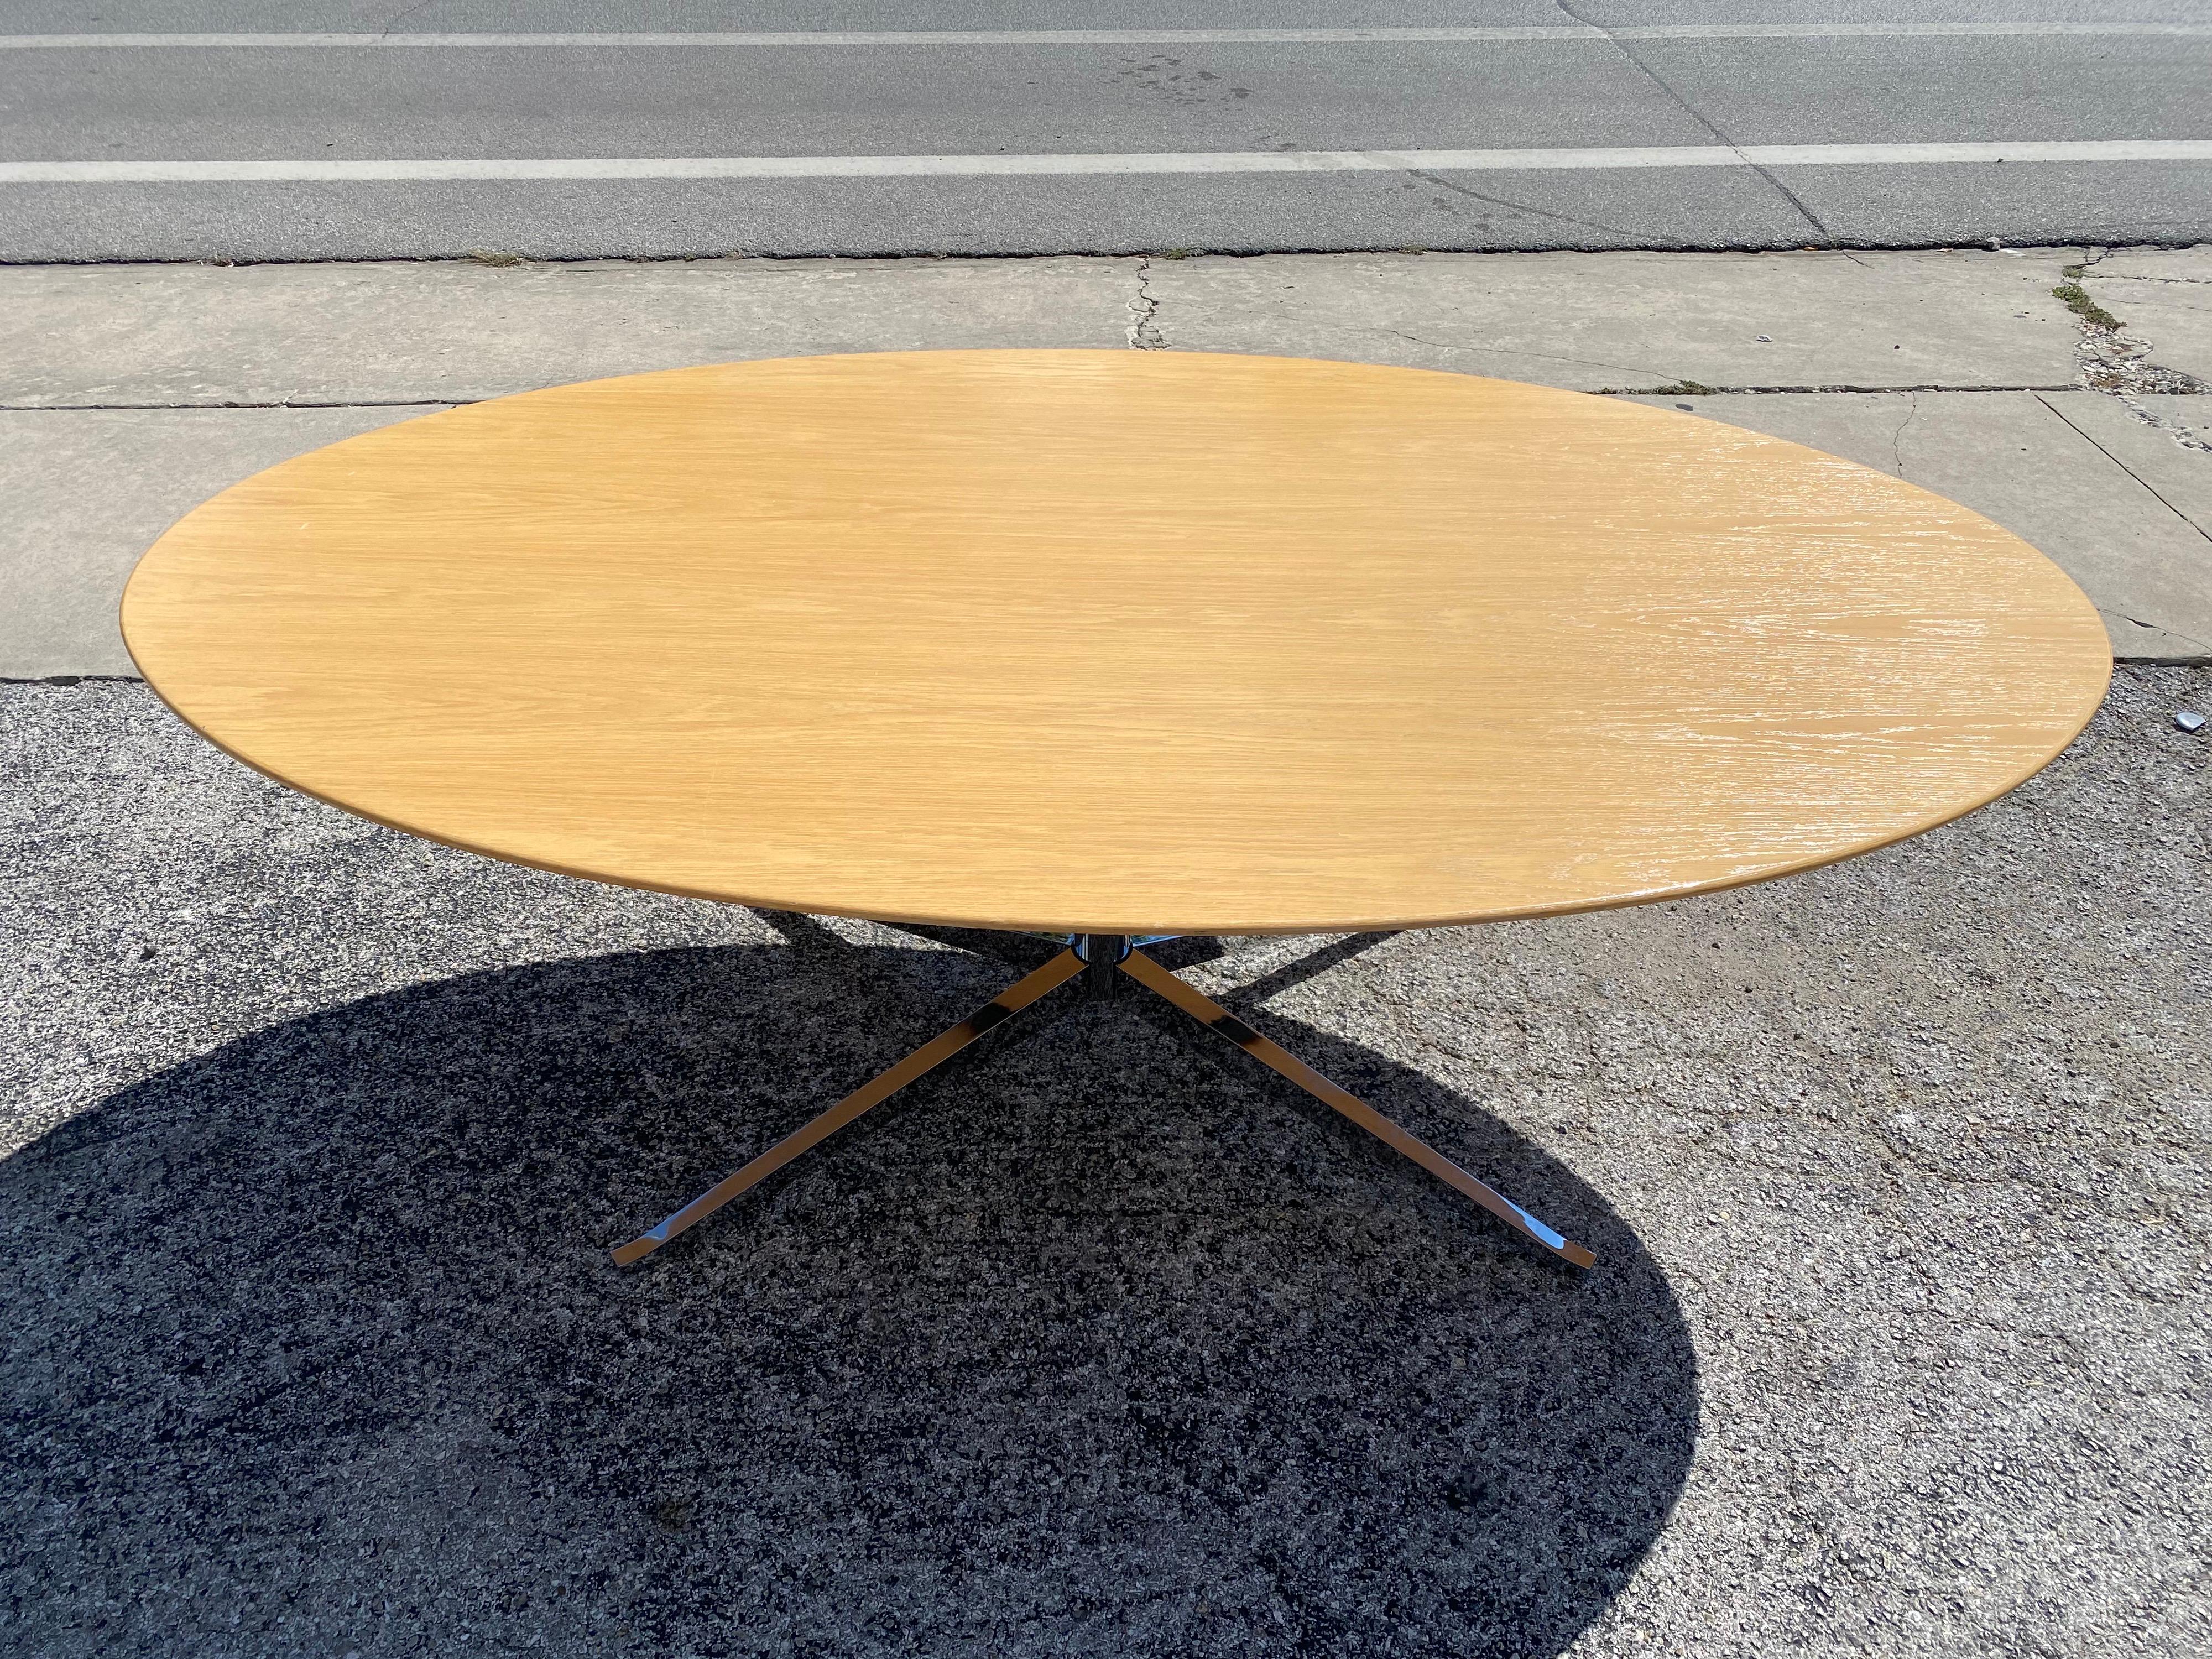 Iconic Mid-Century Modern dining table or conference table designed by Florence Knoll features an oak oval top and the classic chrome base. This mid-century dining table is in great vintage condition.